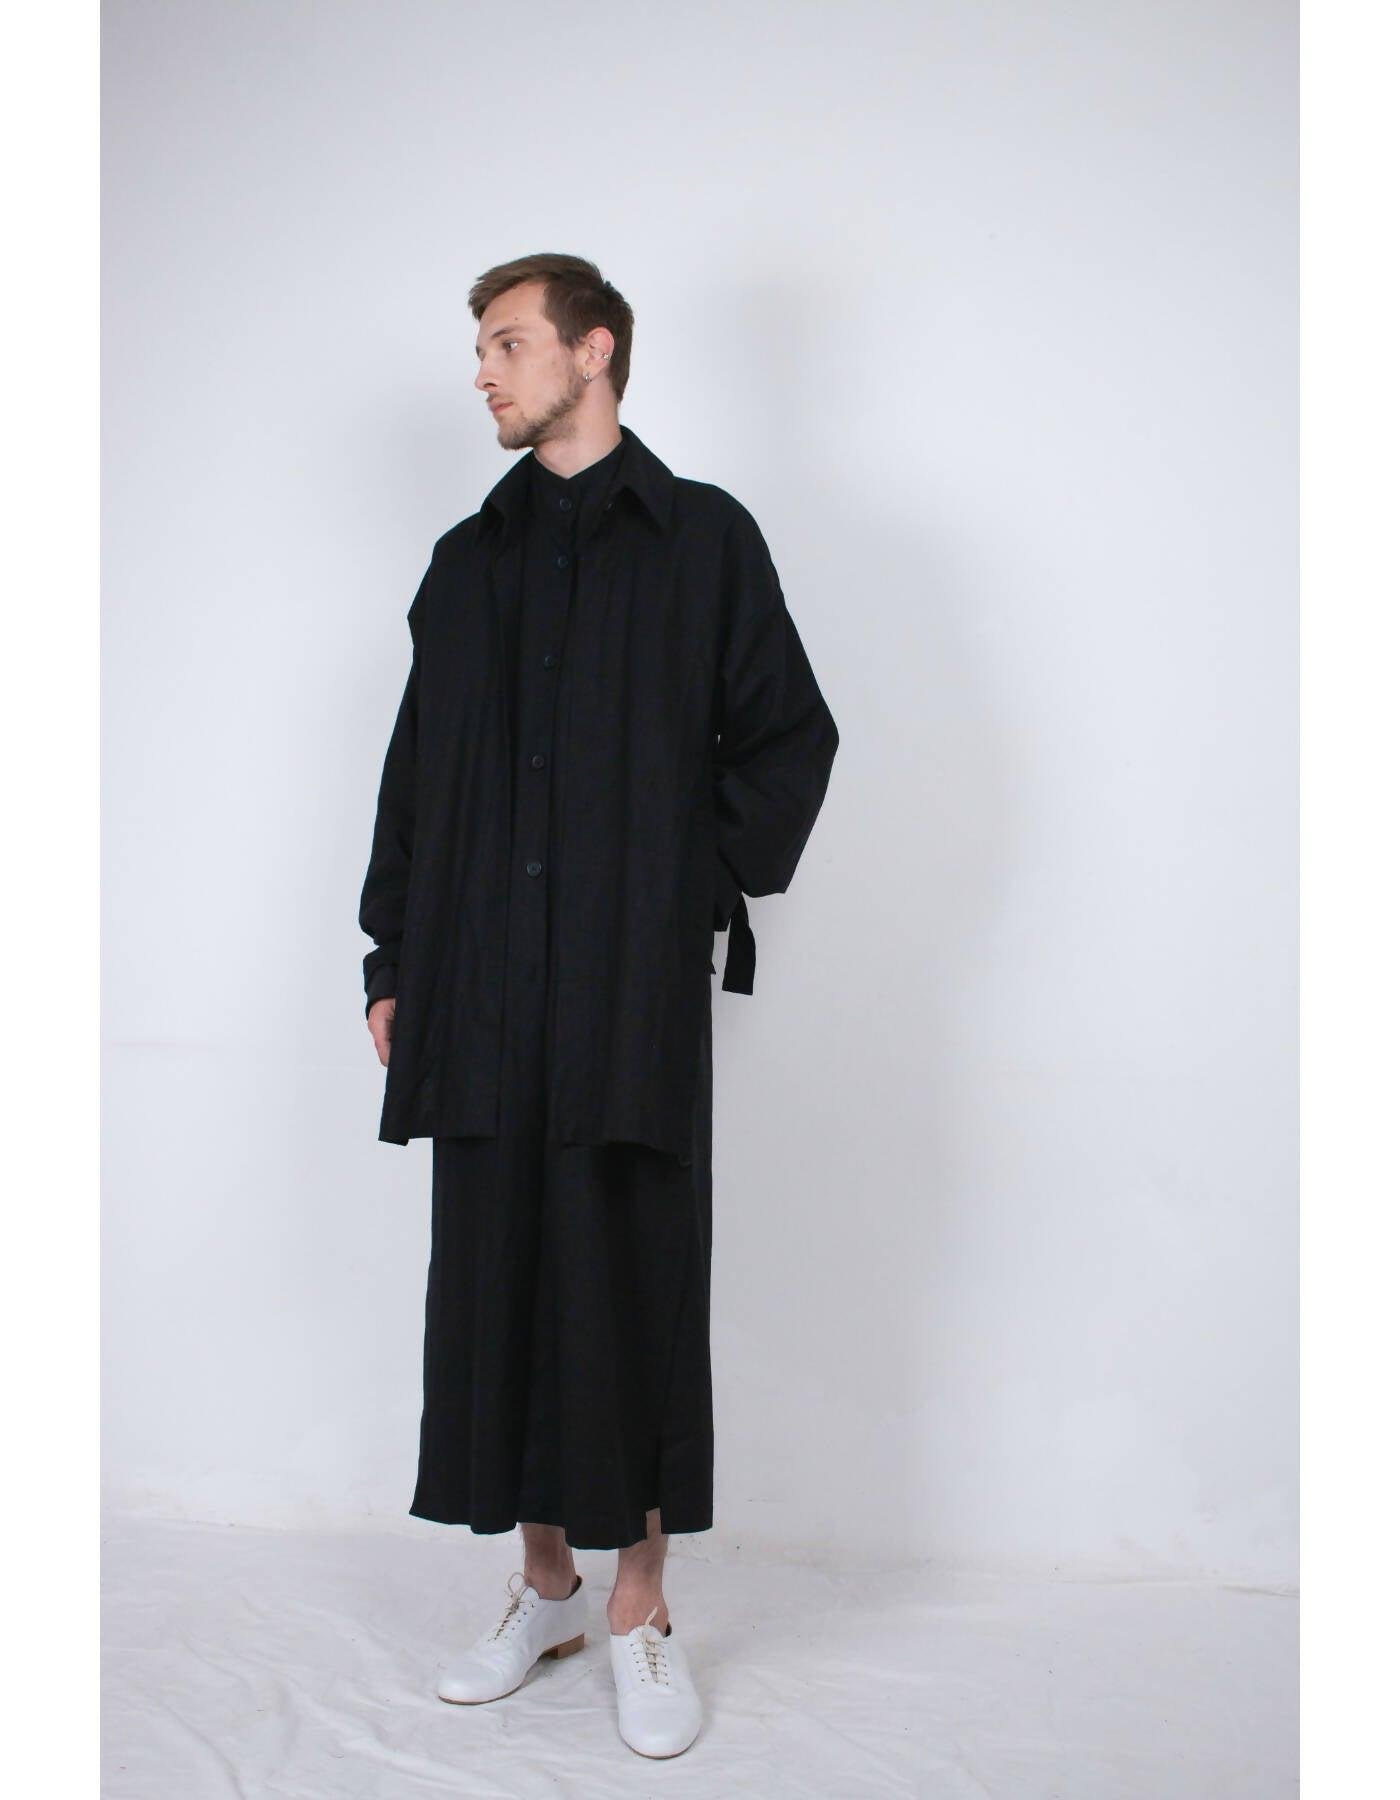 Black Layered Flax Coat by LUDUS